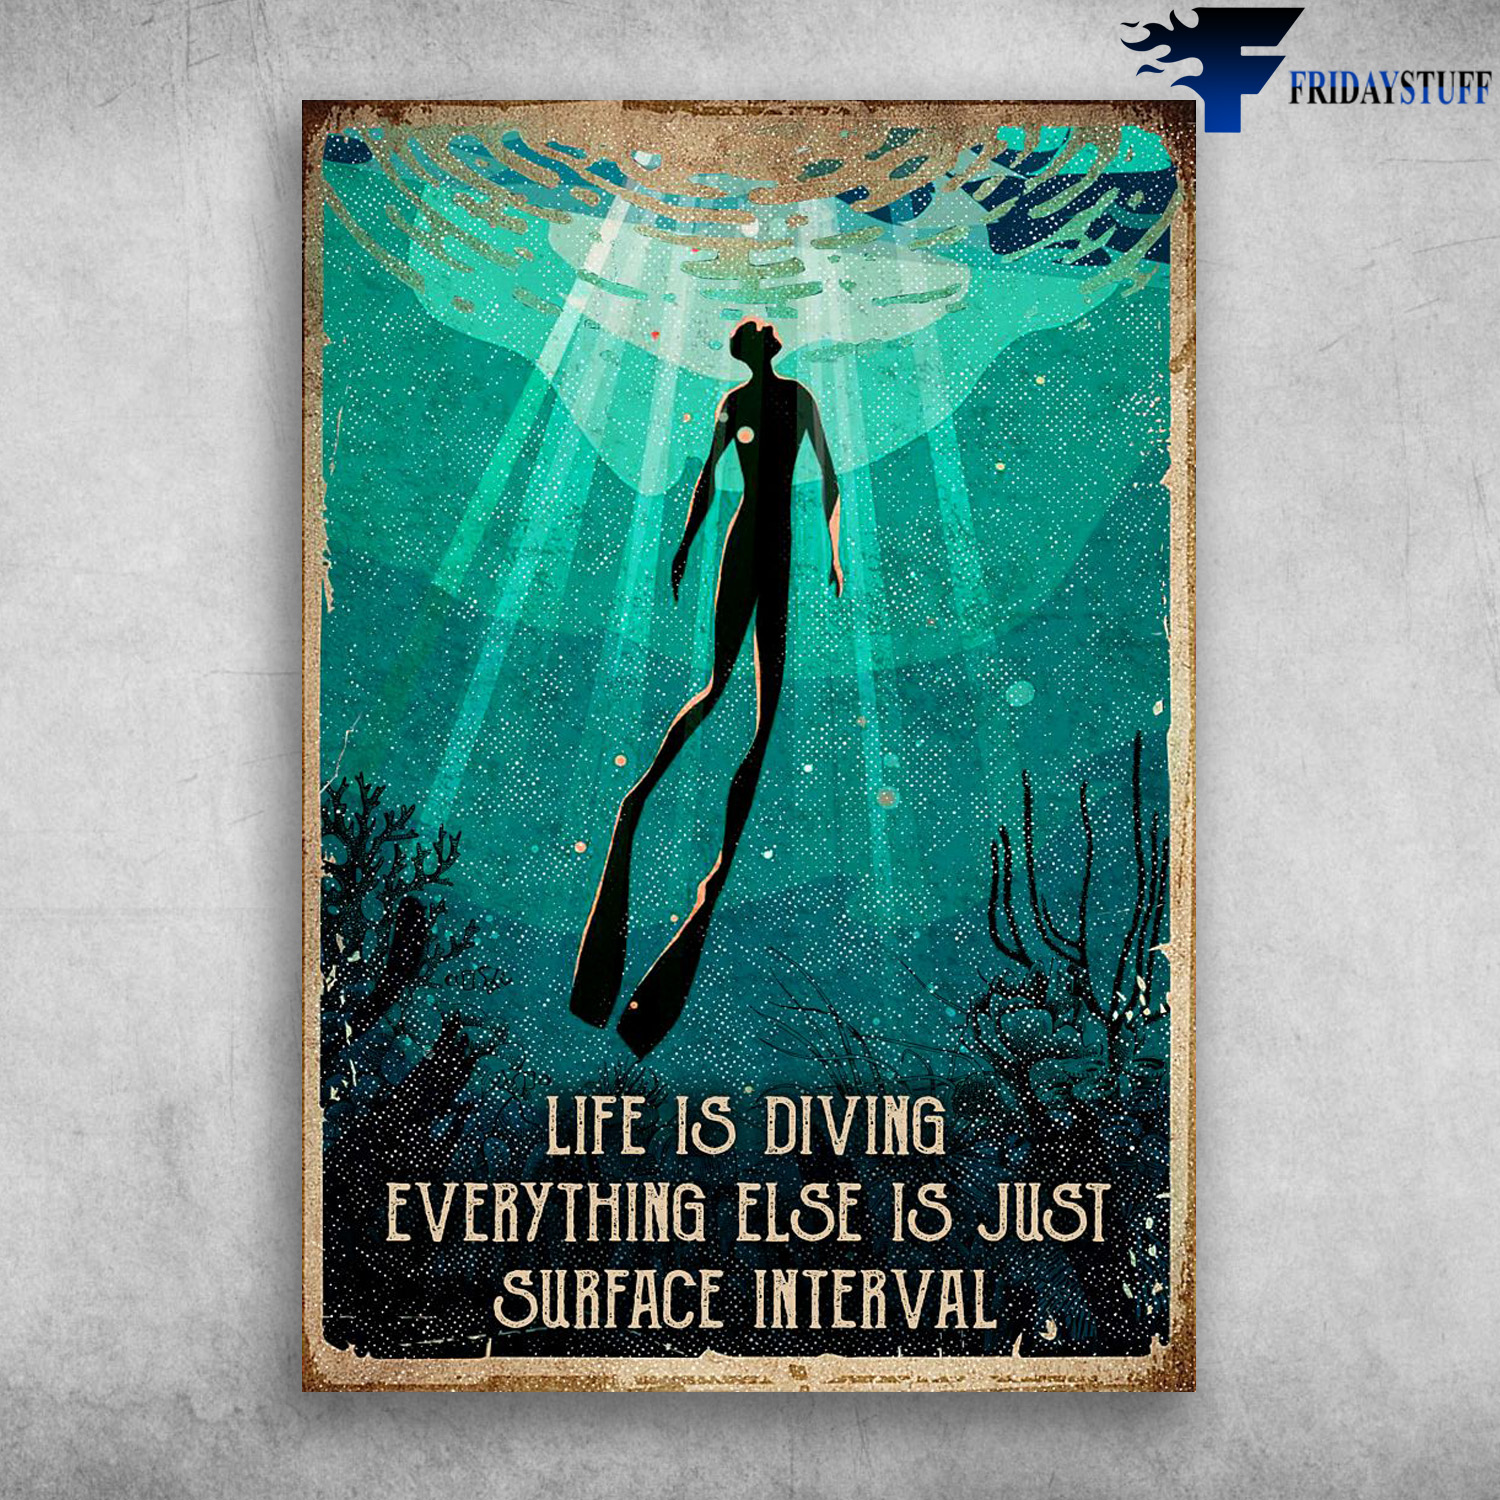 Diver In The Ocean - Life Is Diving, Everything Else Is Just Surface Interval